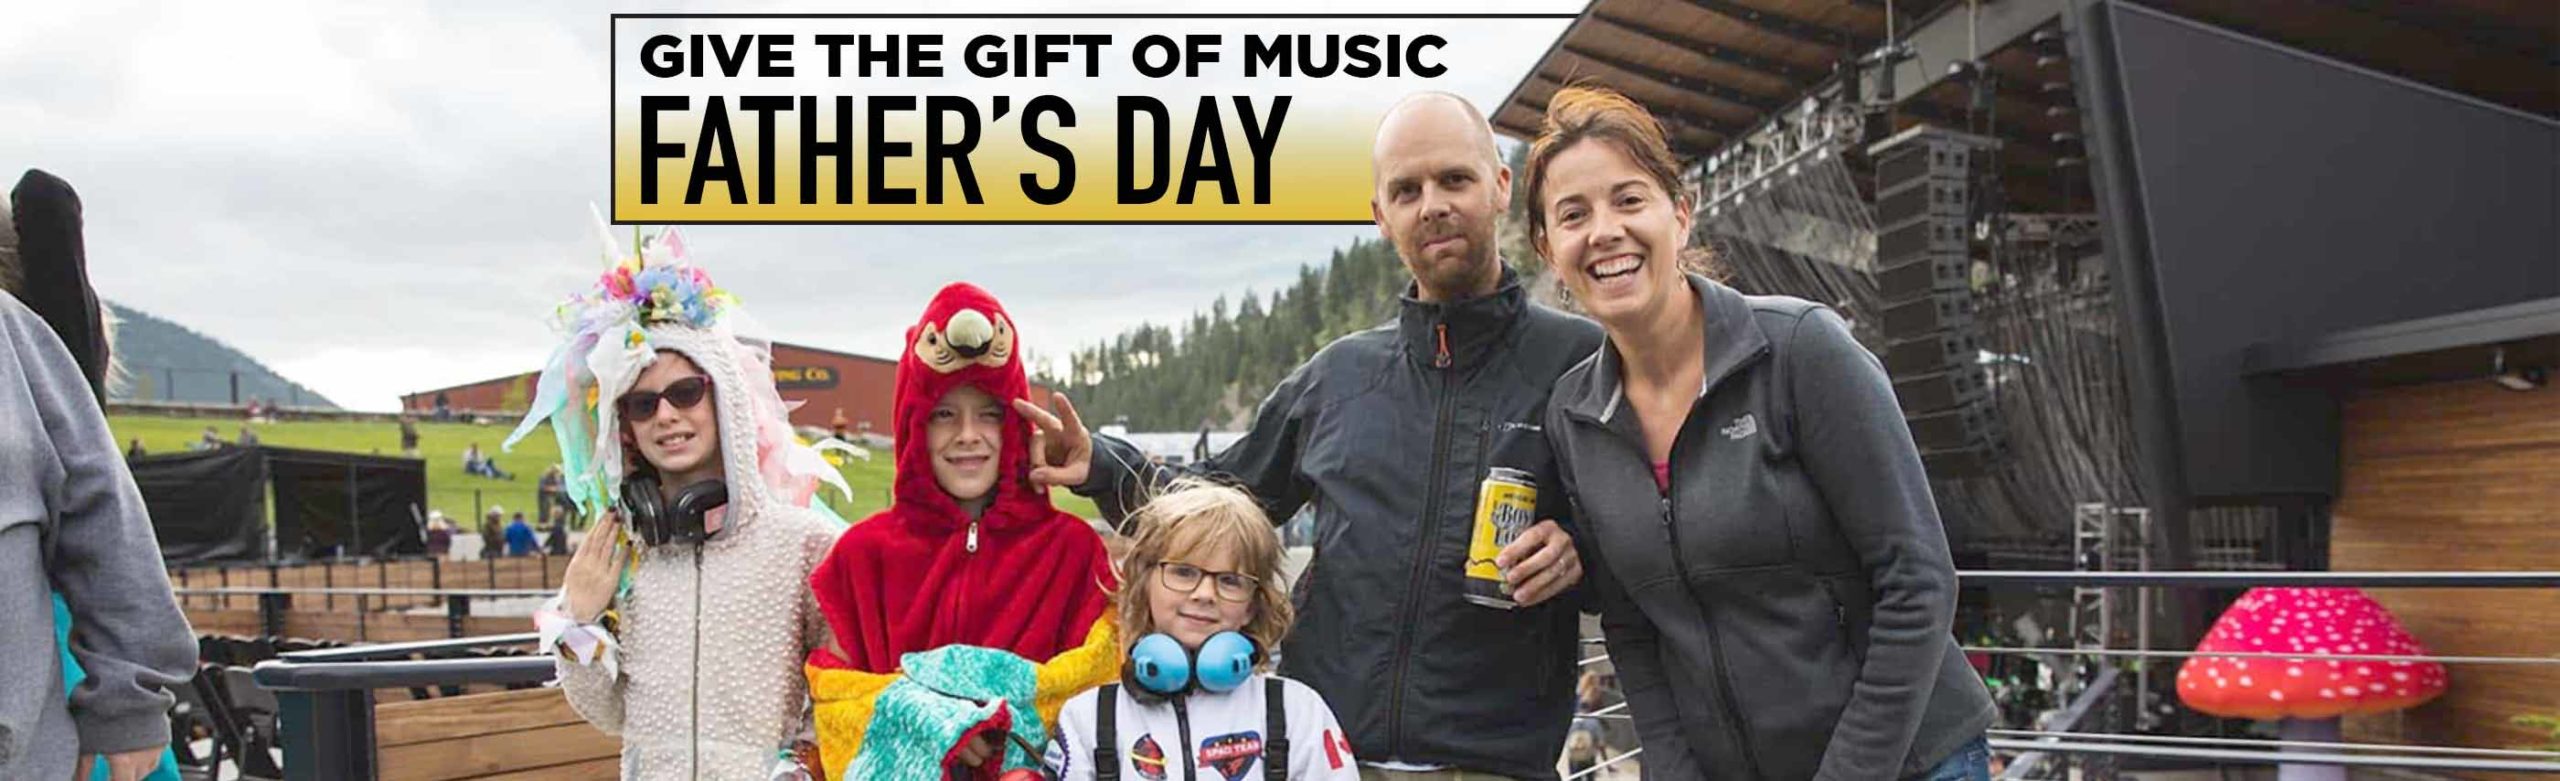 Give Your Dad the Gift of Music: Logjam Gift Cards Available Image